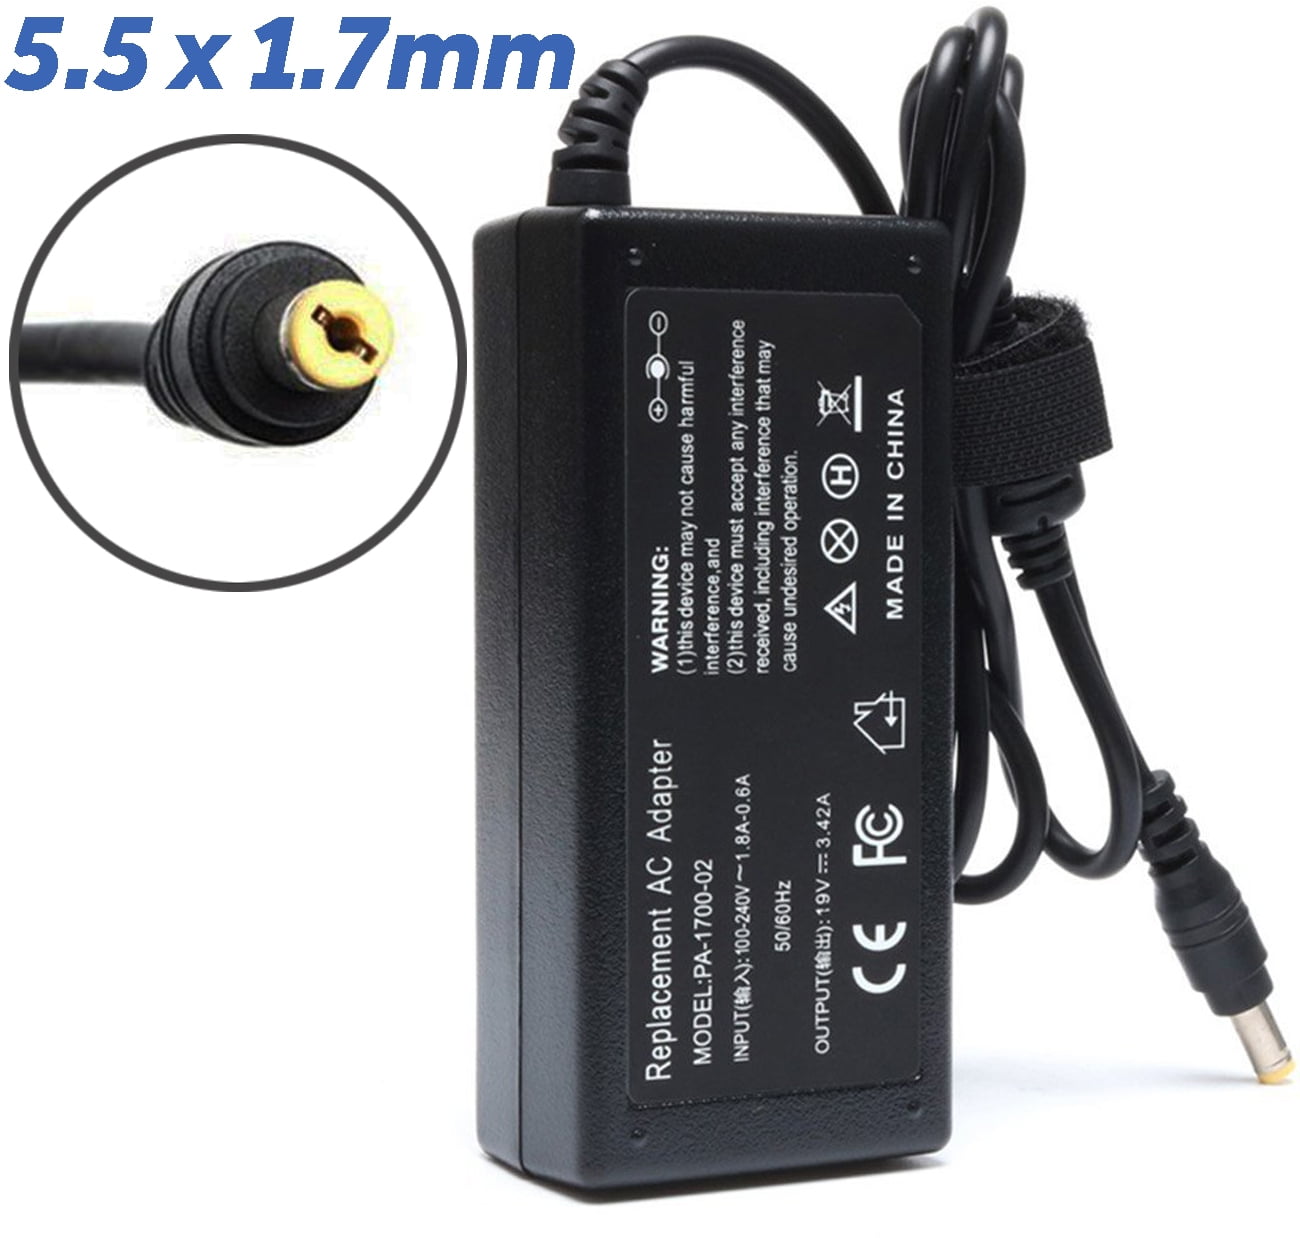 Uniq-bty Wall Charger AC Power Adapter Replacement for Summer 29650 Infant in View 2.0 Baby Monitor 